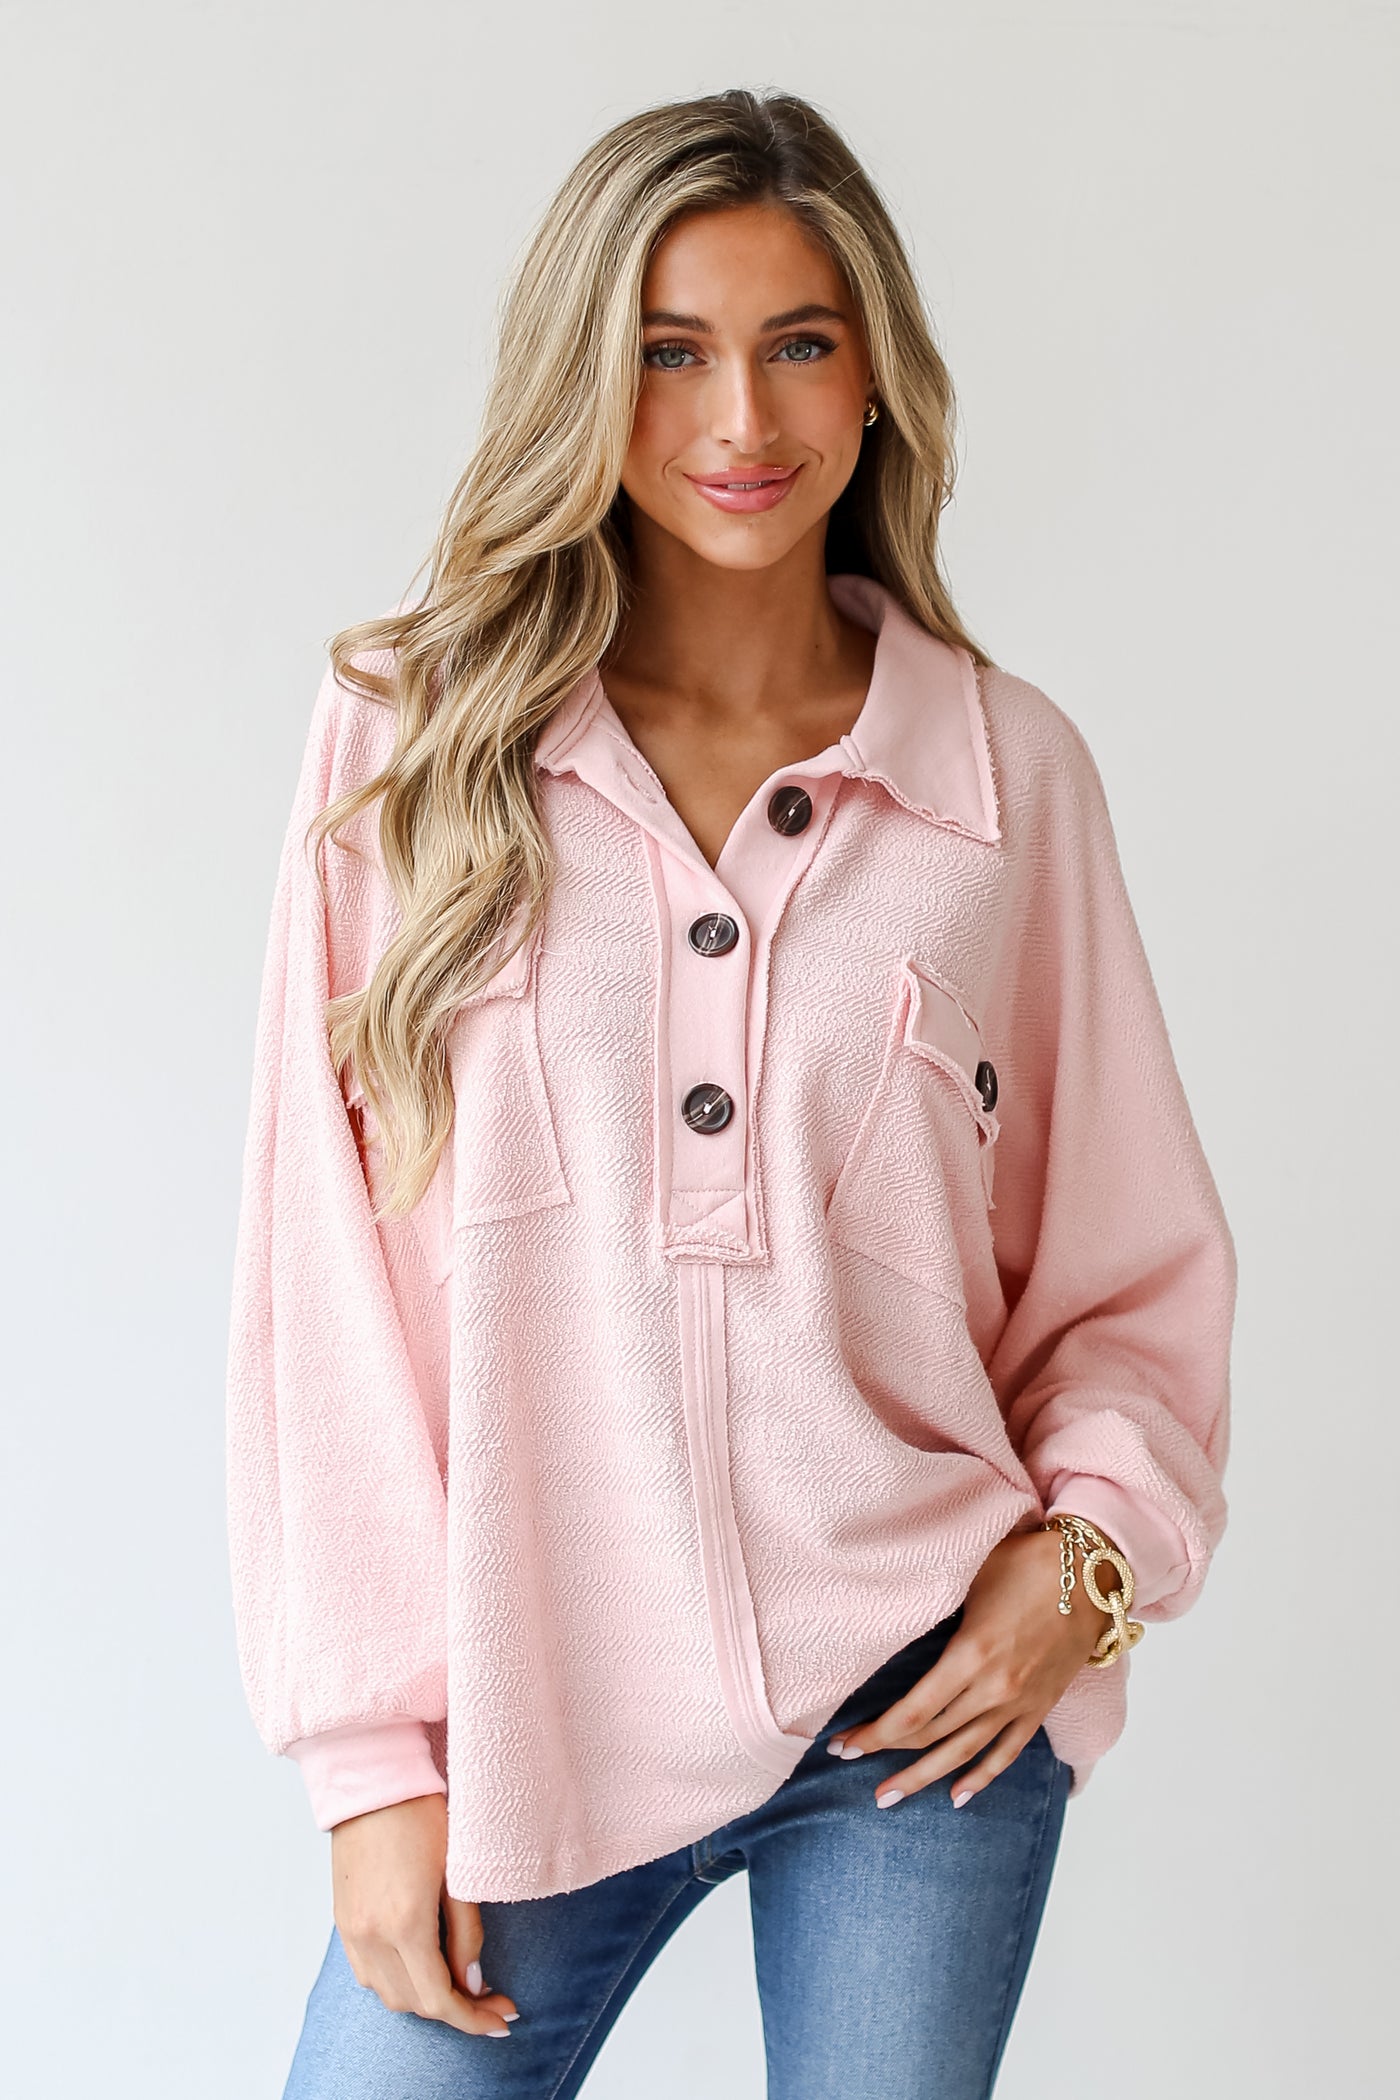 blush Oversized Collared Top on dress up model